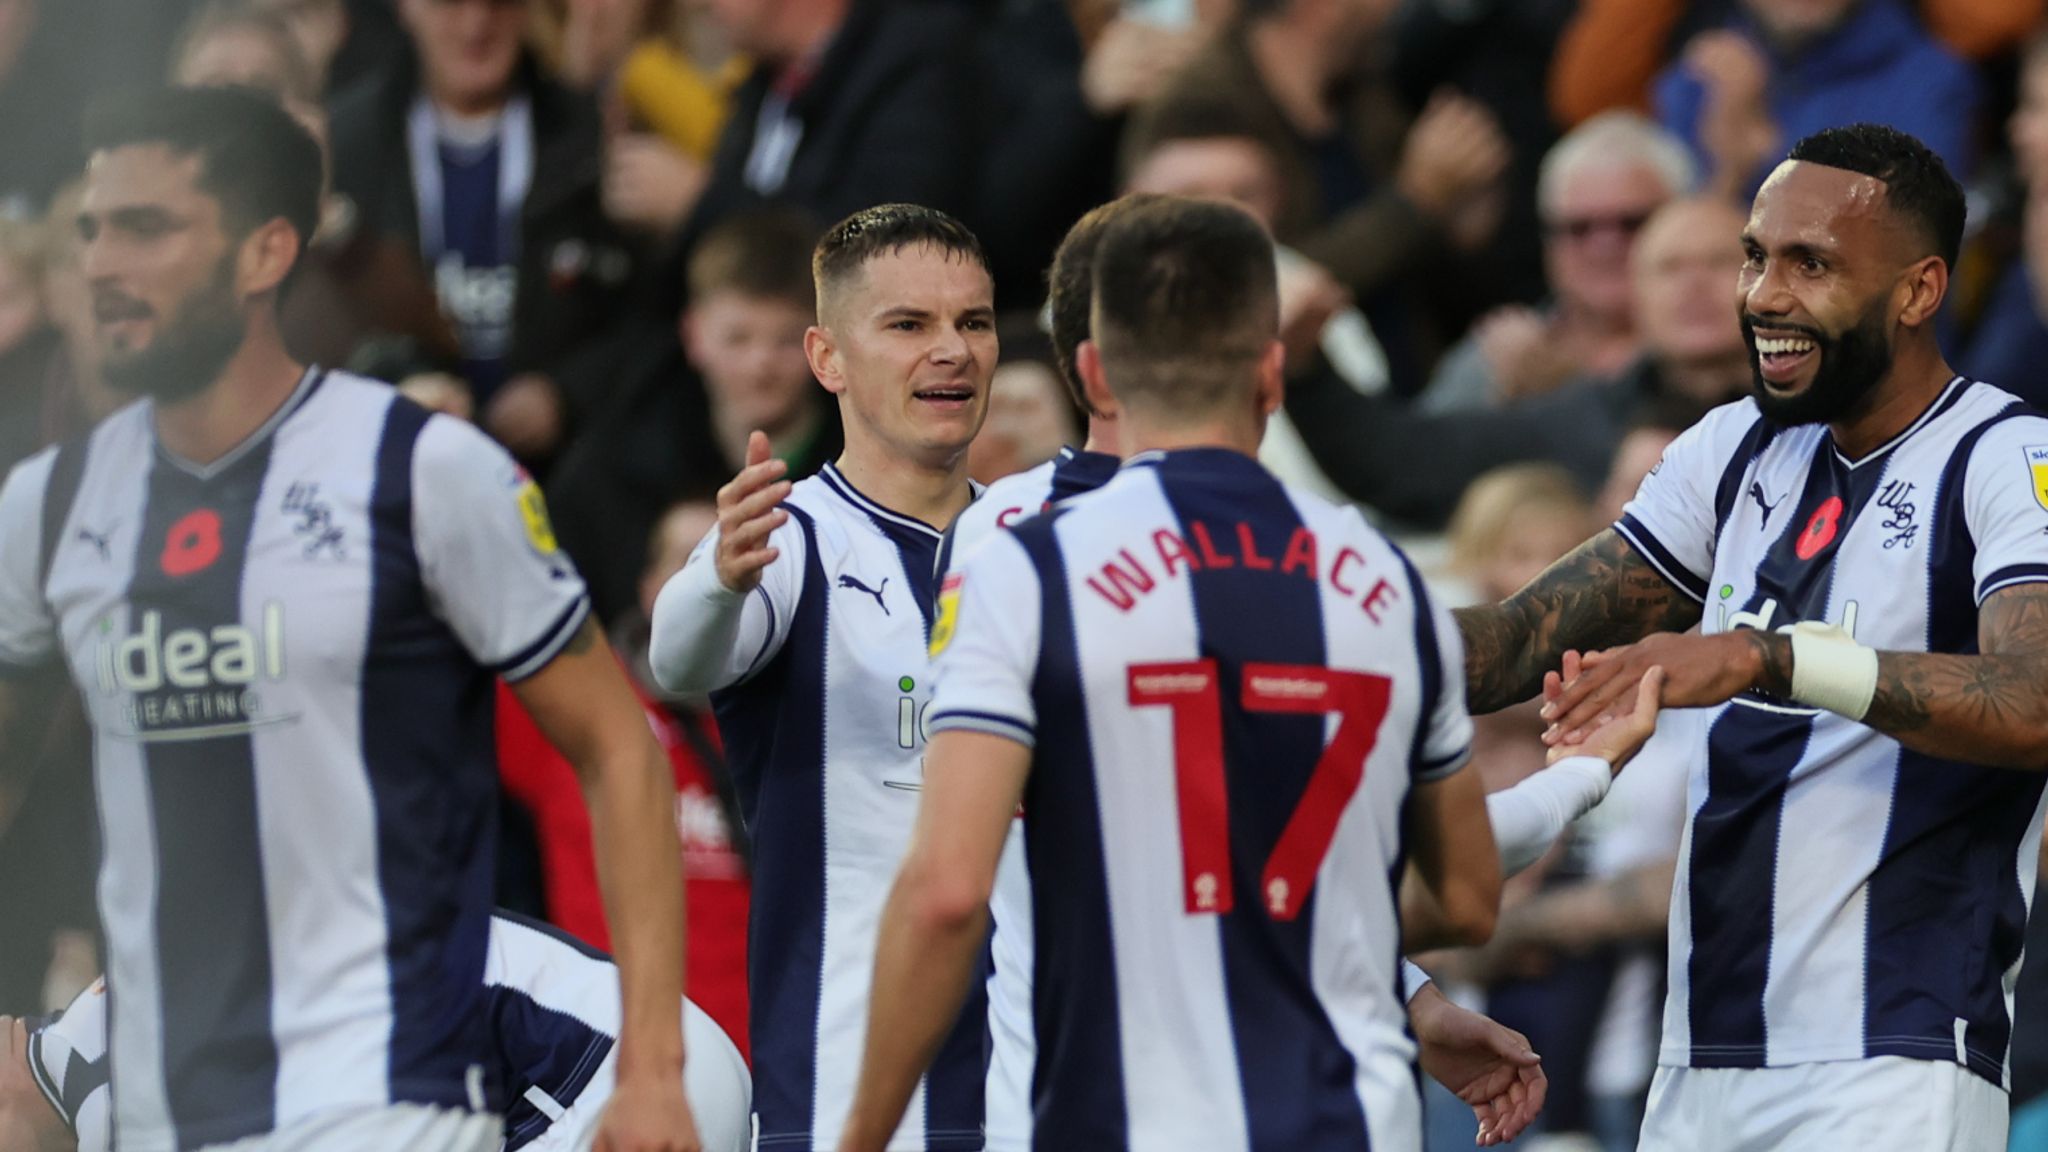 Carlos Corberan: West Brom competed against more than just 11 players